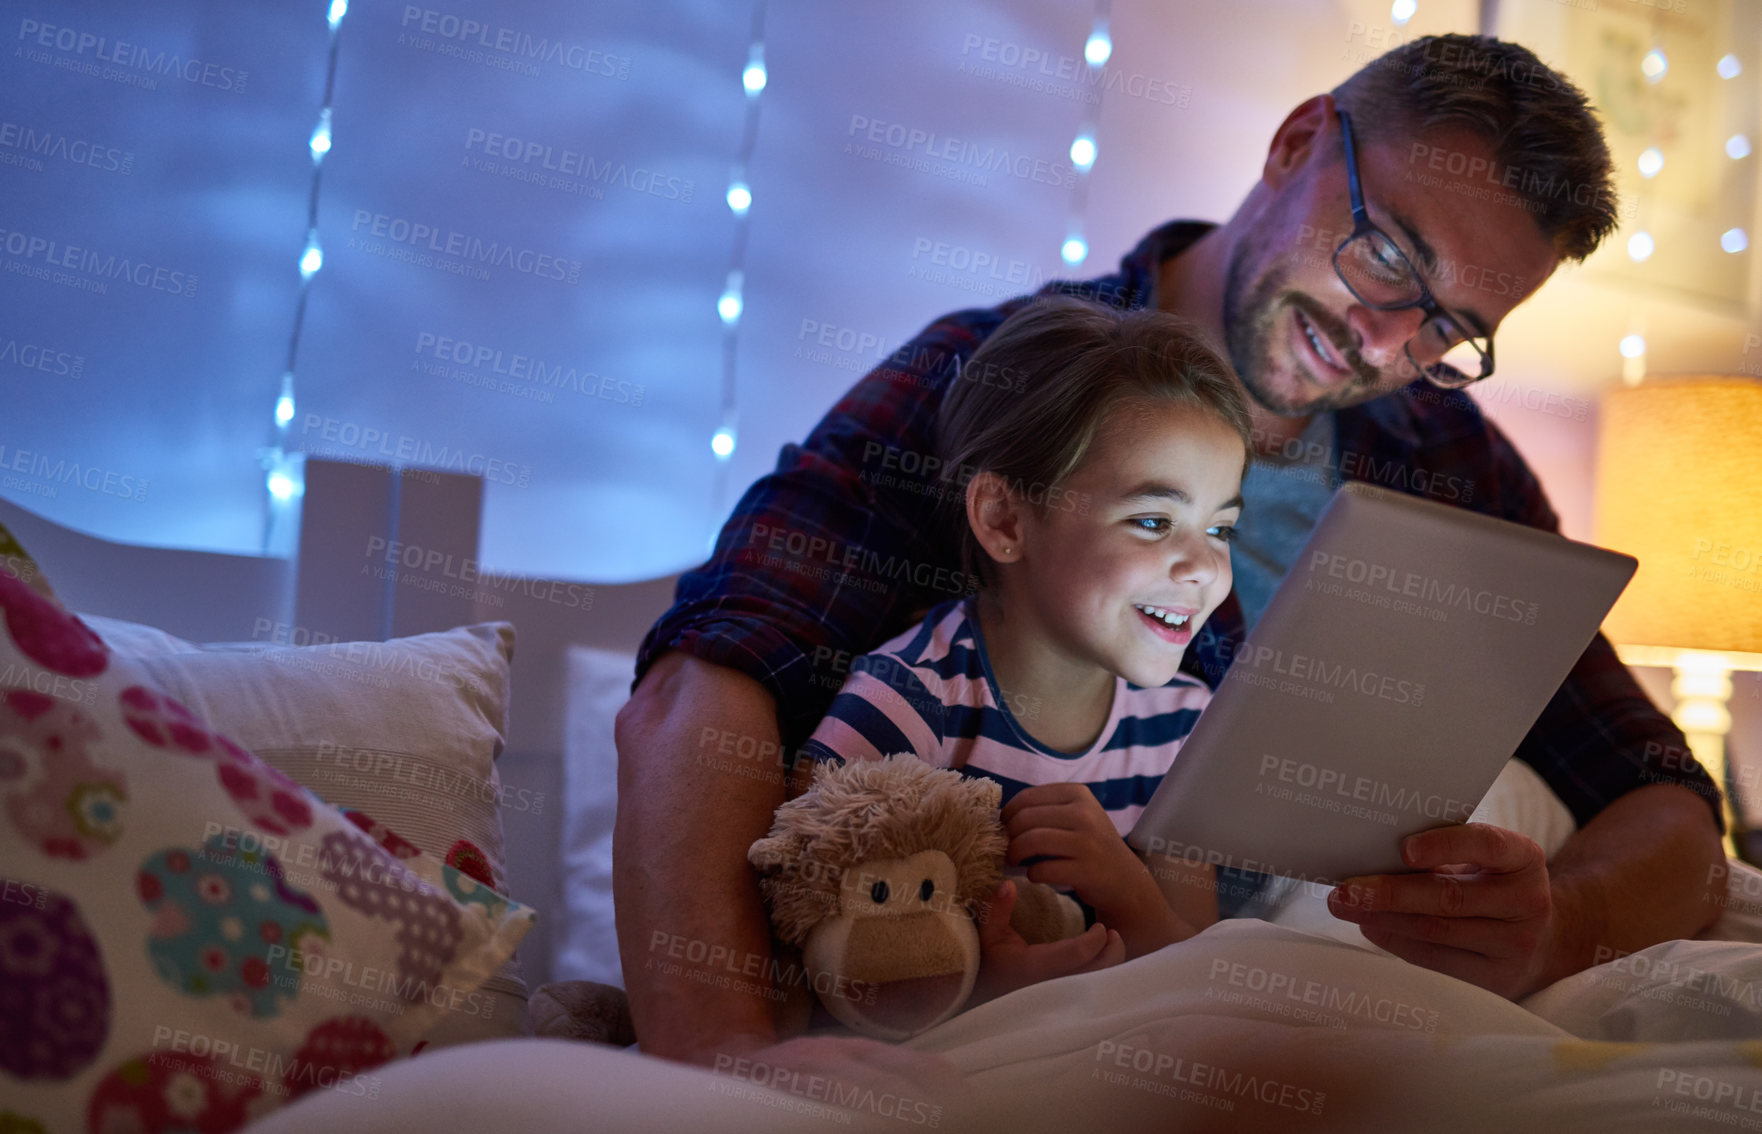 Buy stock photo Shot of a little girl and her father using a tablet before bedtime